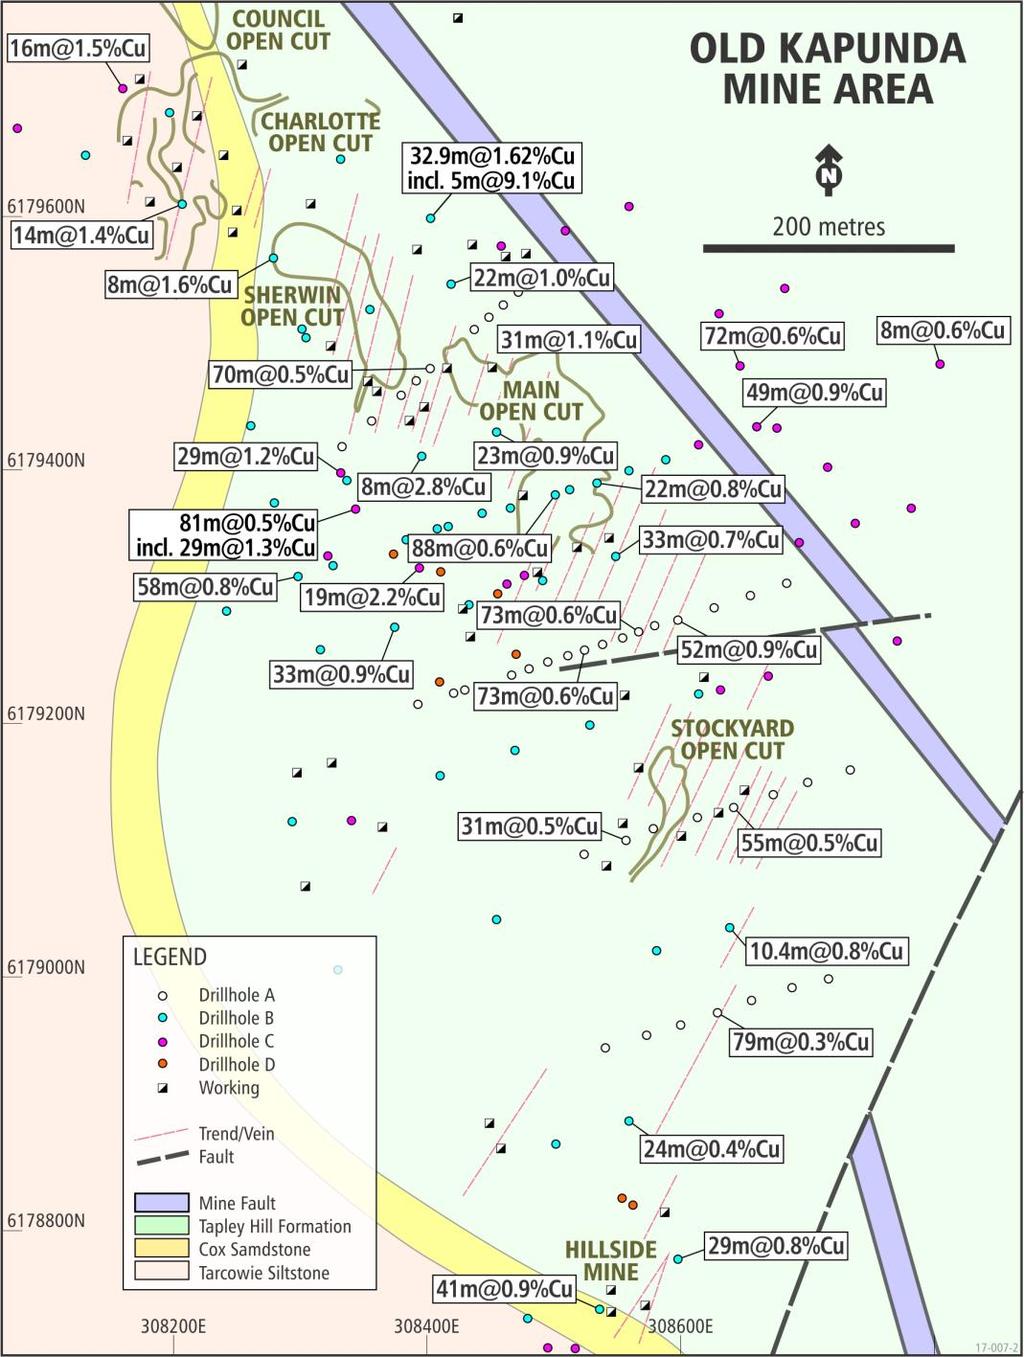 The Kapunda copper deposit has been comprehensively drill tested over many years (Ref Figures 2 &3), however a JORC compliant resource estimate has not been published.